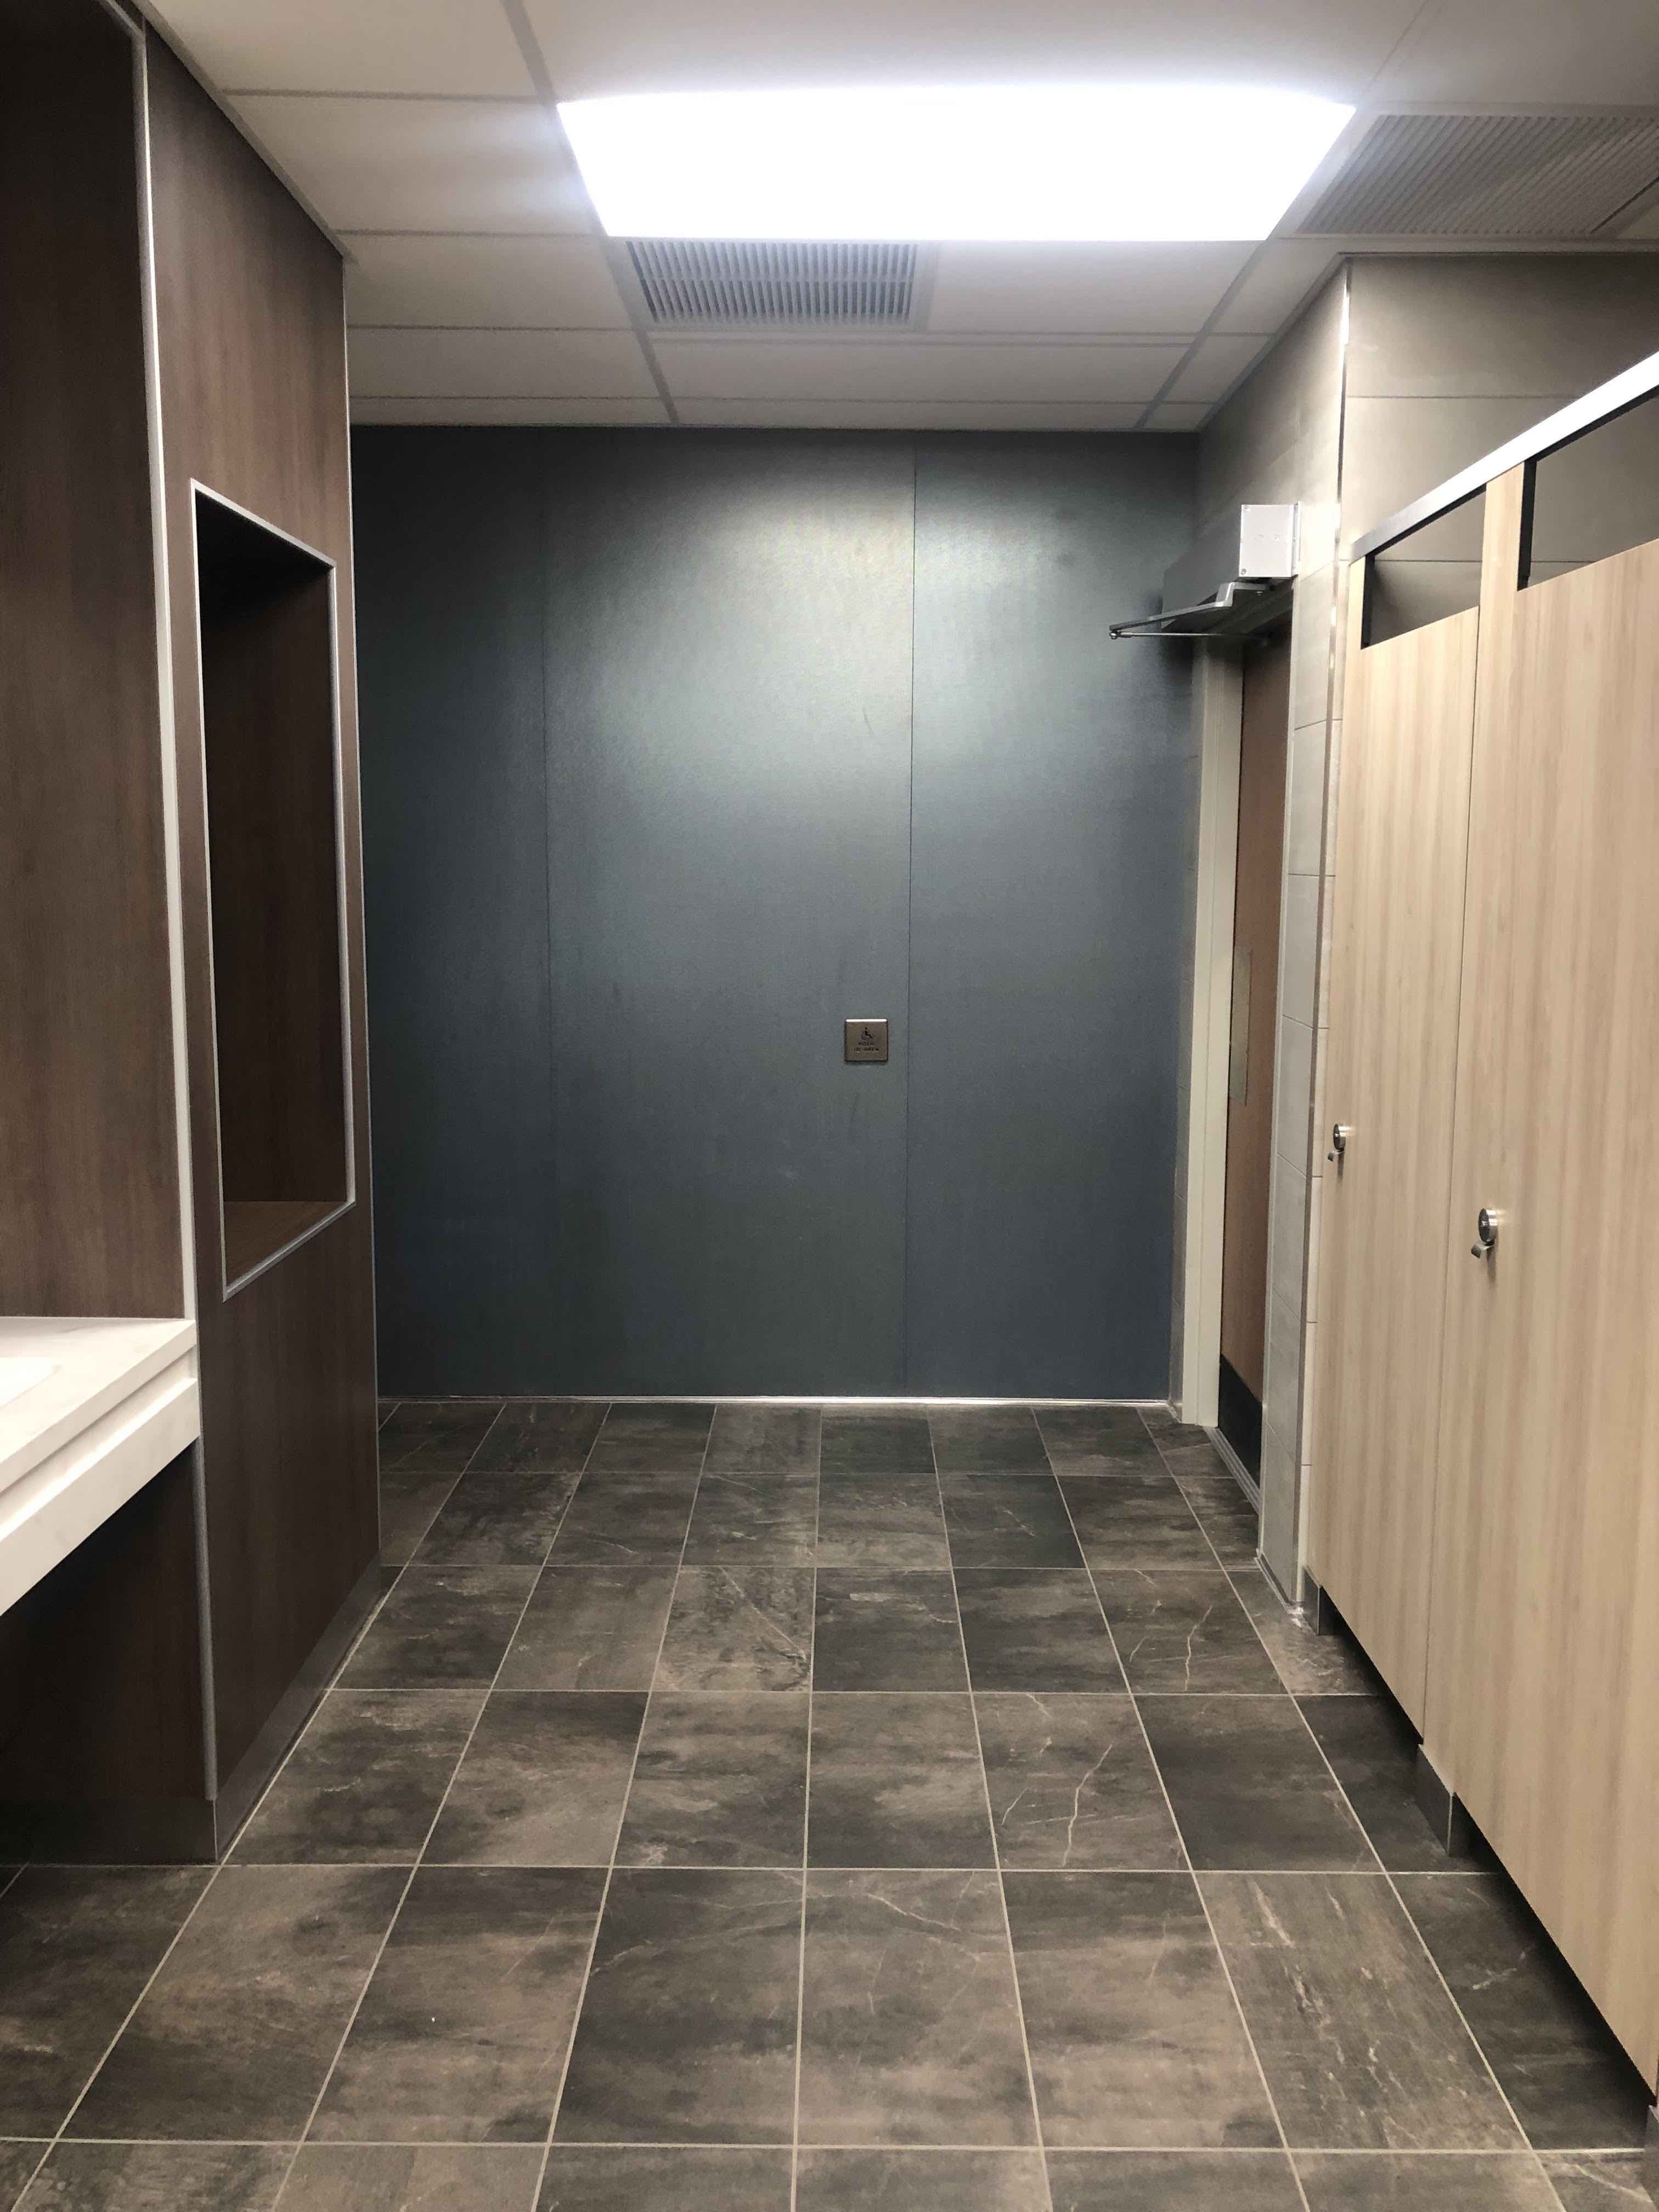 Newly remodeled Kent State University women’s restroom with GPTP.